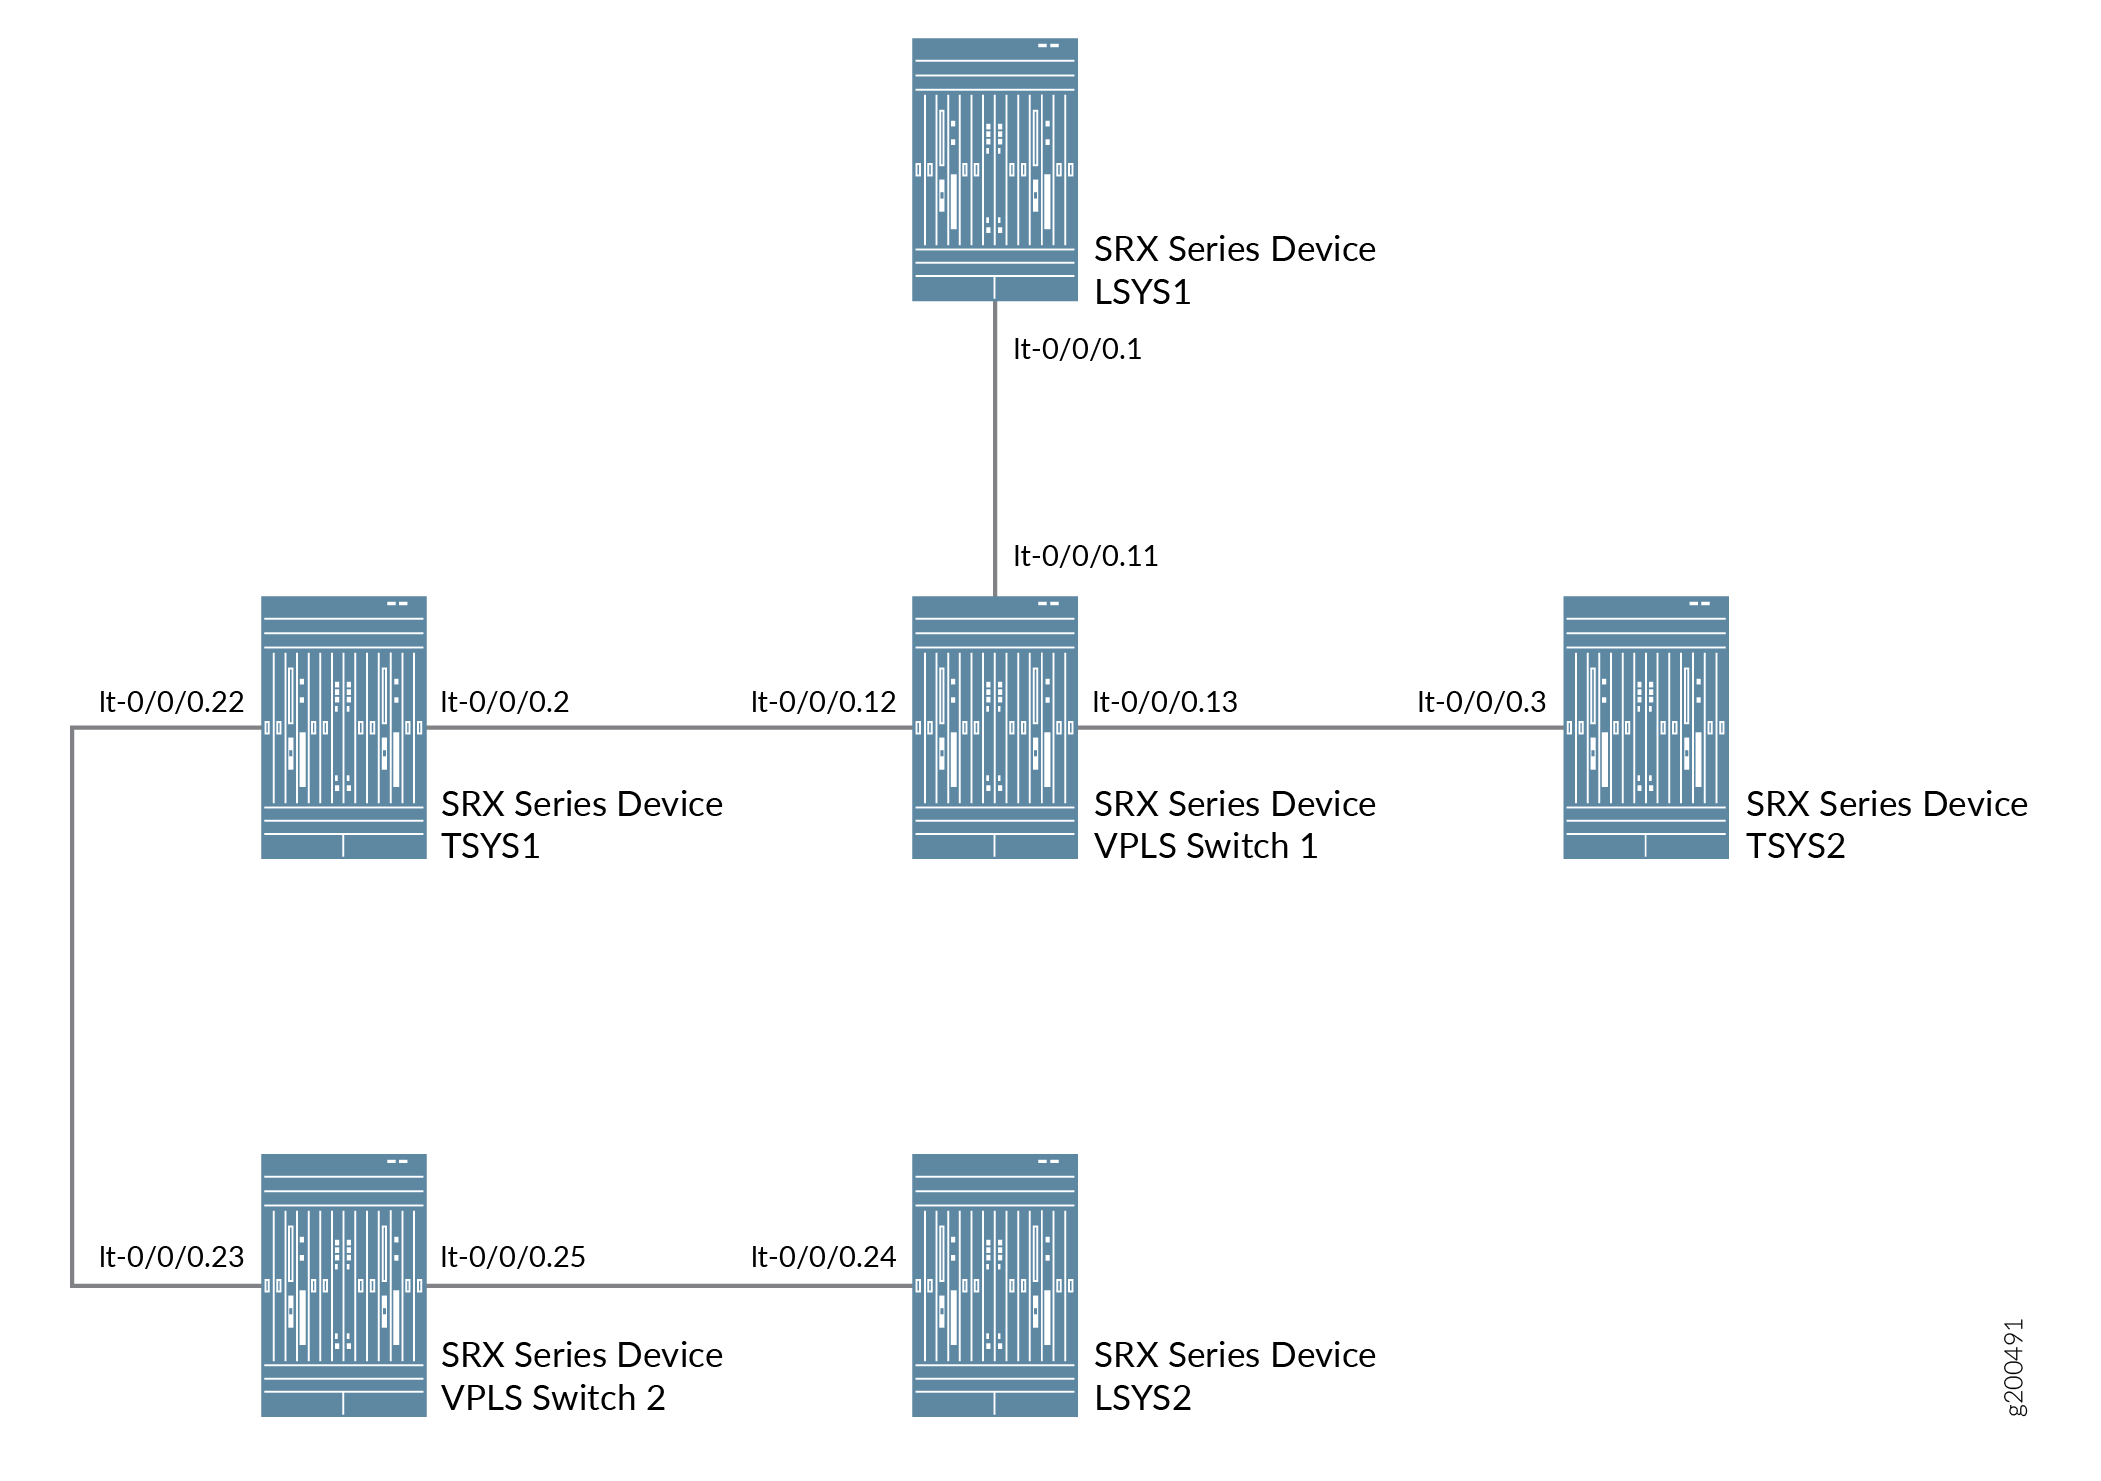 Configuring the interconnected logical systems and tenant systems with multiple VPLS switches.